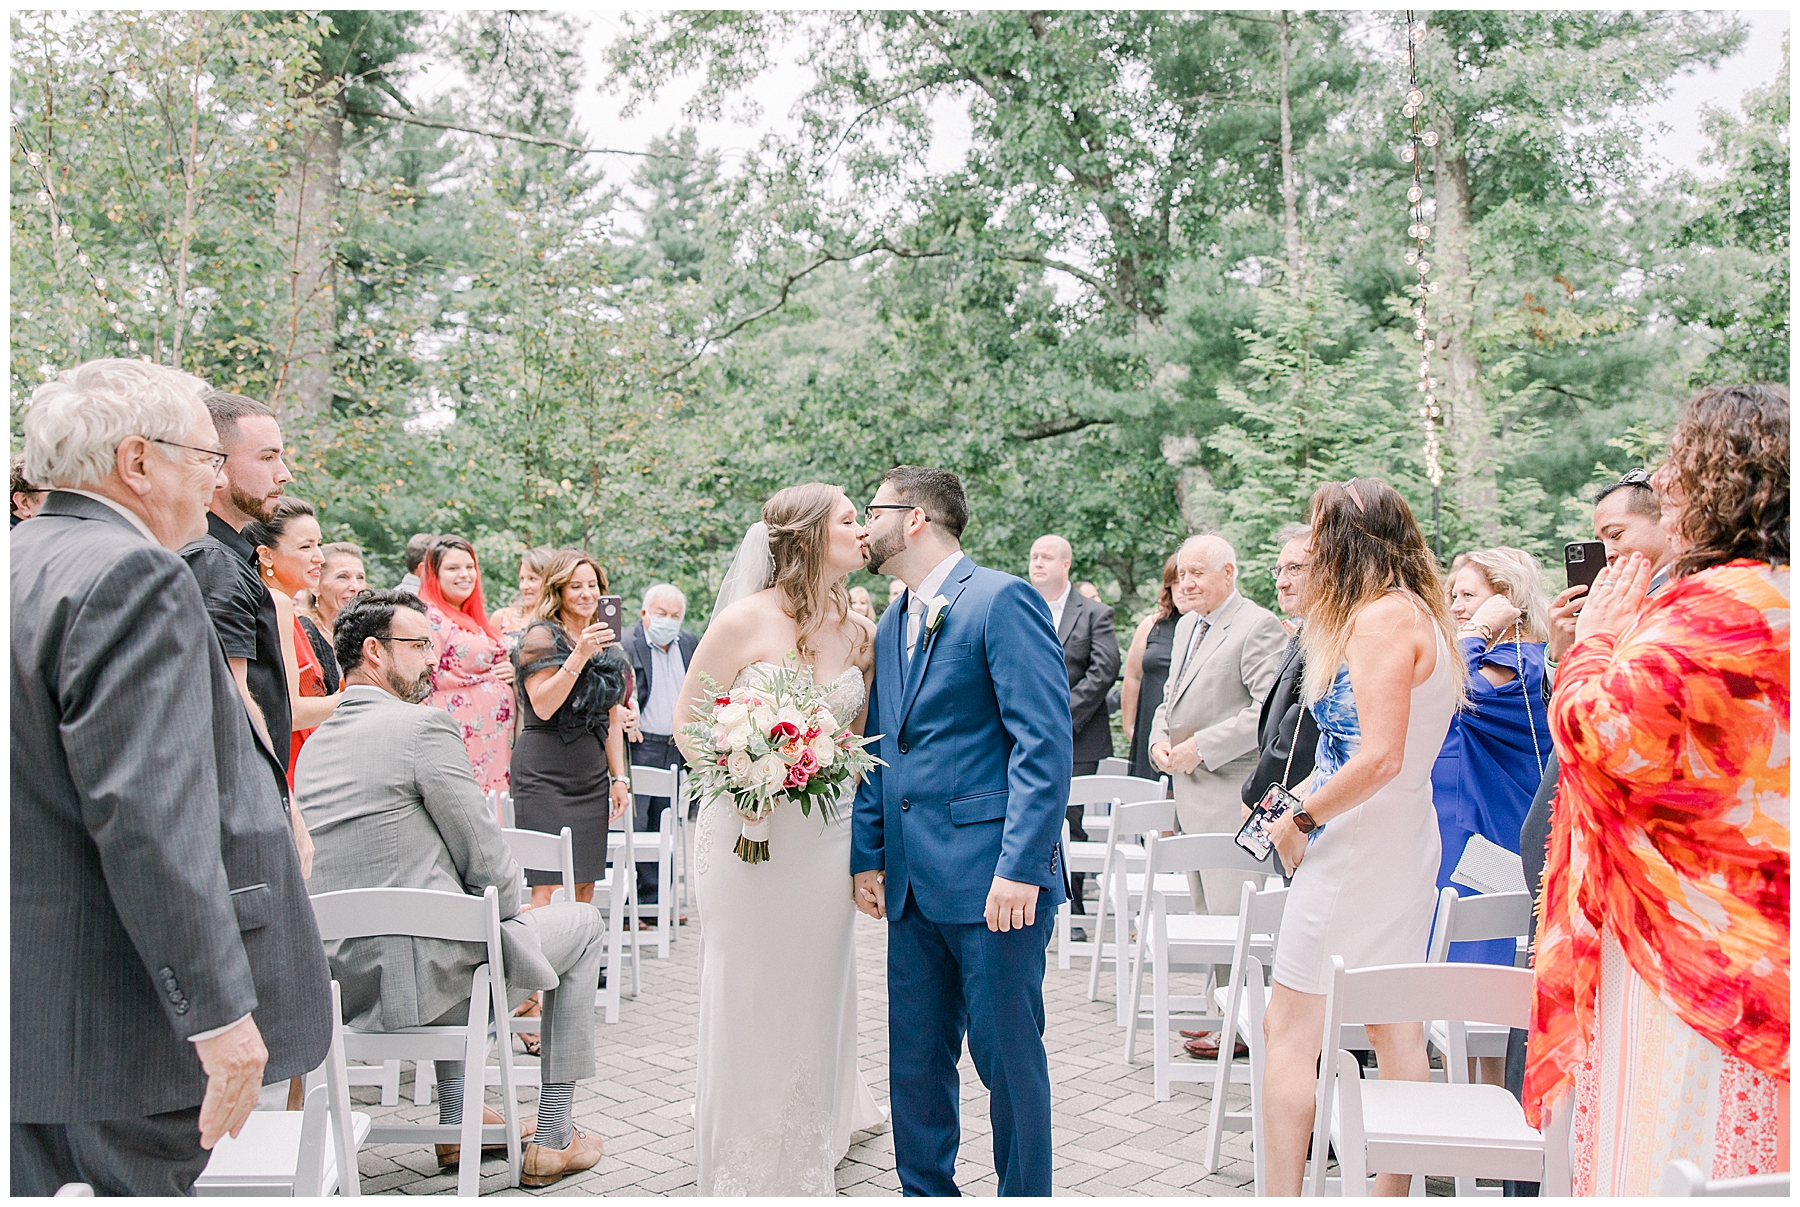 couple kiss after outdoor wedding ceremony at the Lakeview Pavilion in MA